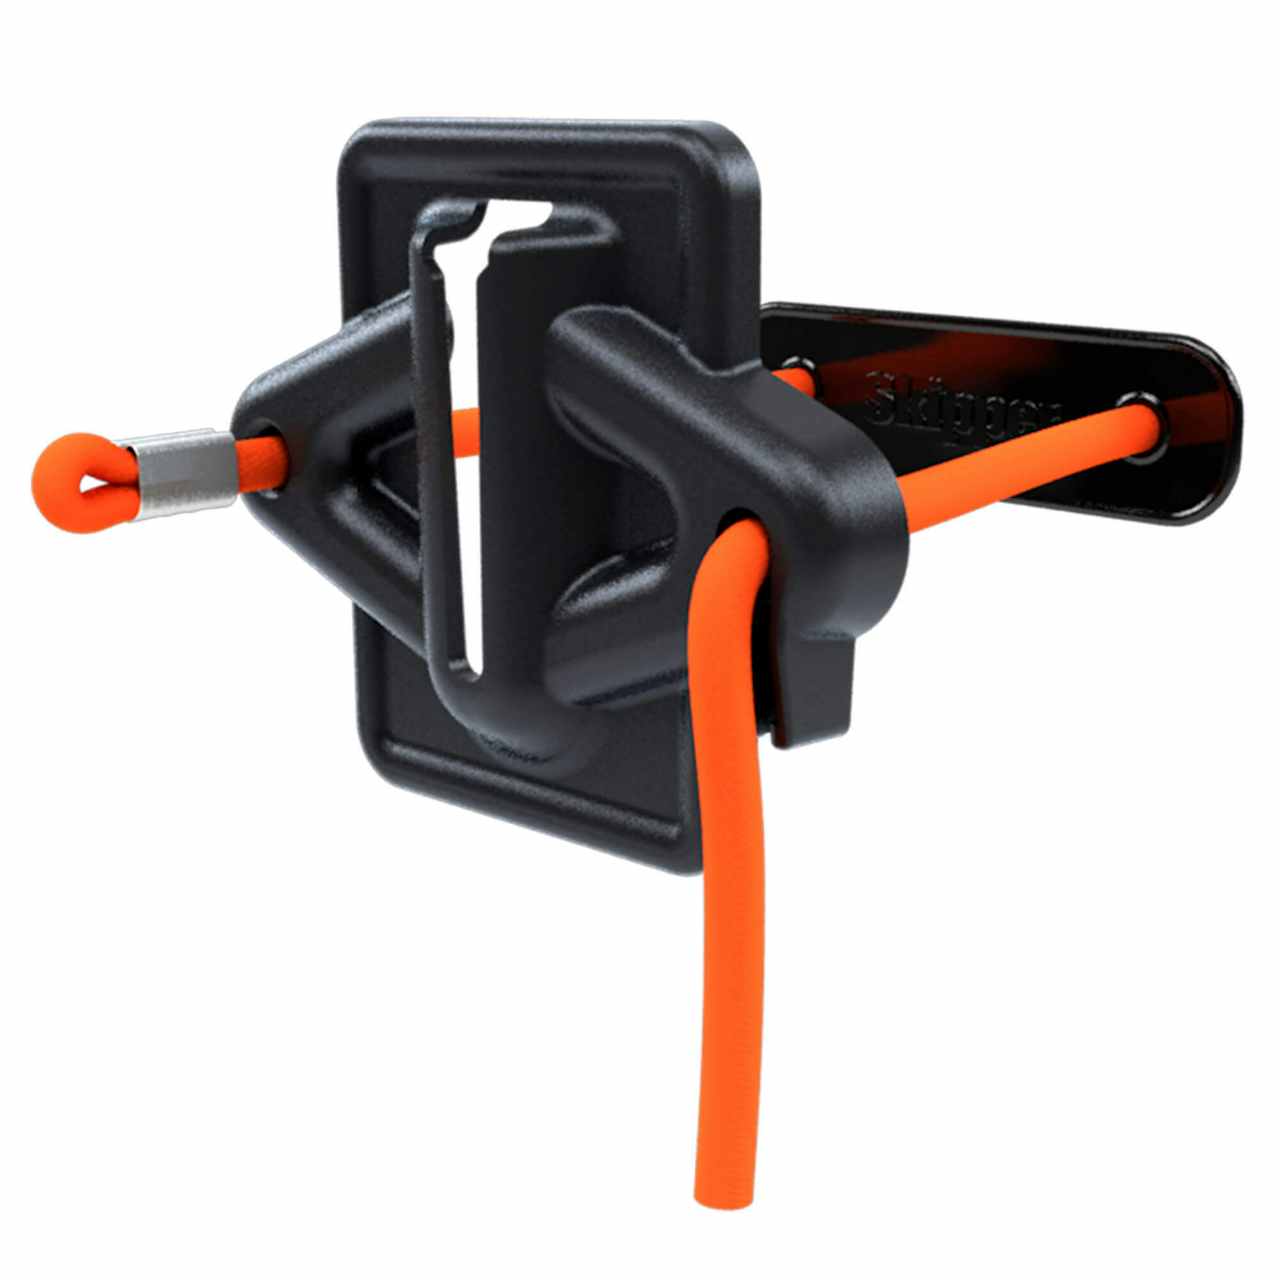 Skipper Magnetic and Cord Strap Holder/Receiver